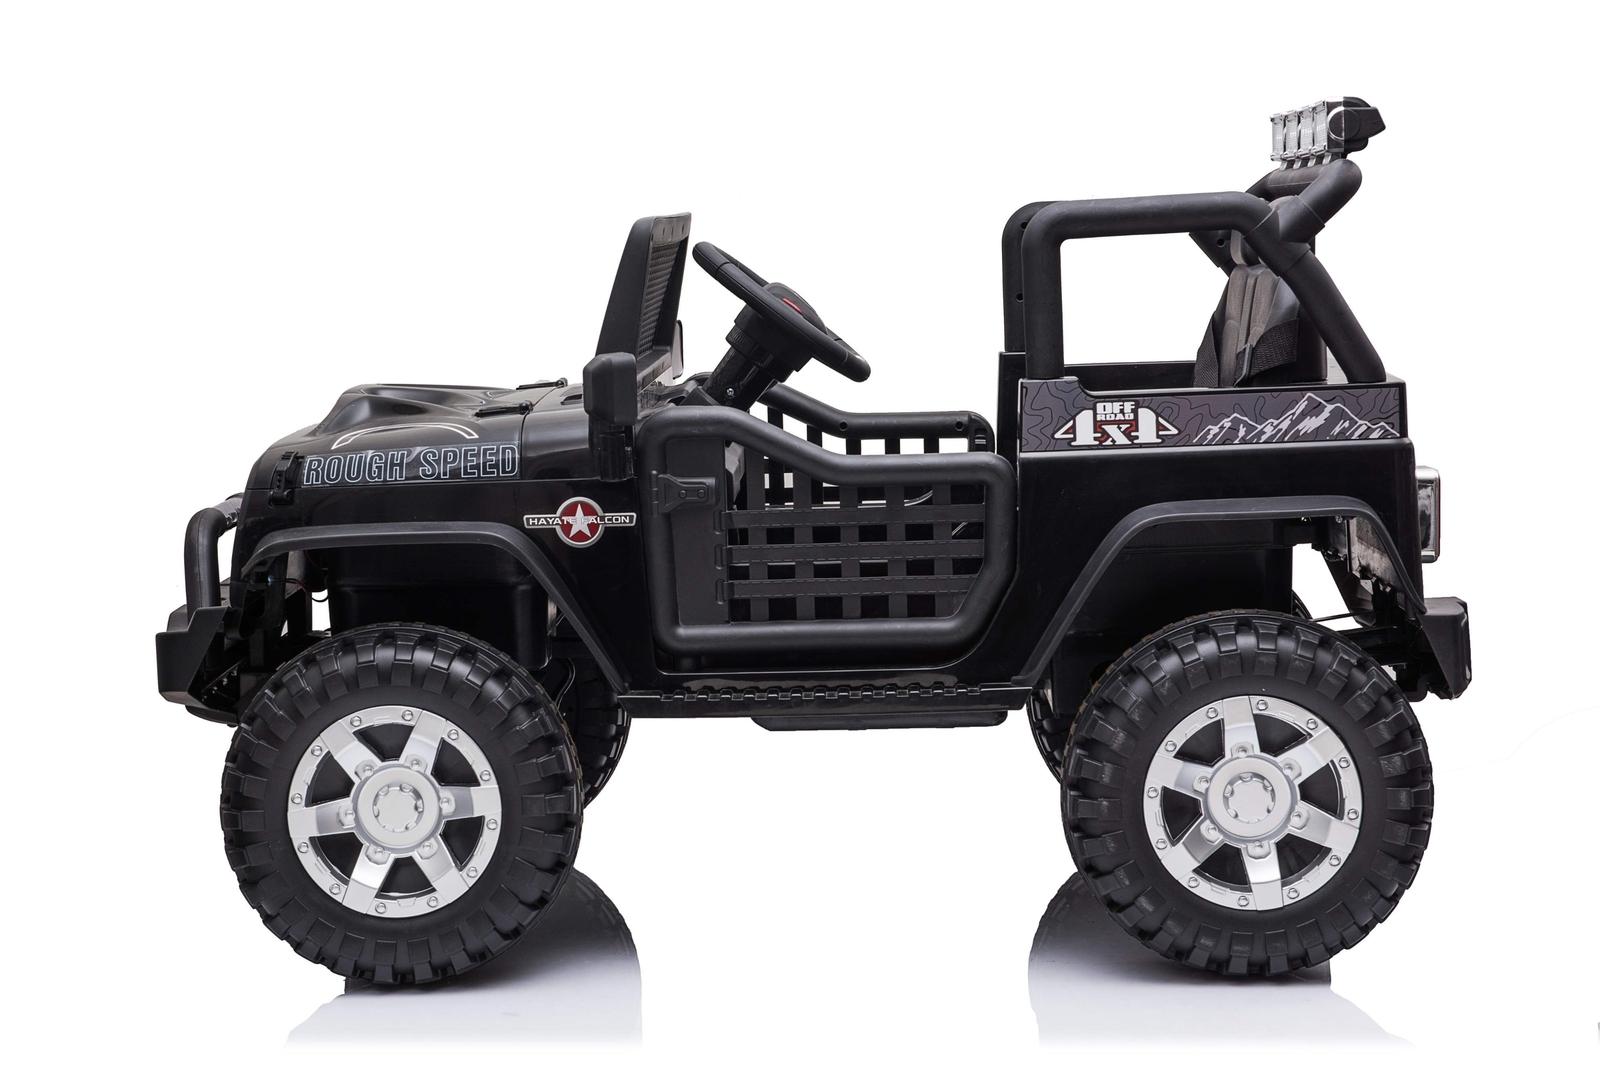 Childrens Ride On/Off Road Jeep VehicleChildrens Ride On/Off Road Jeep VehicleChildrens Ride On/Off Road Jeep Vehicle